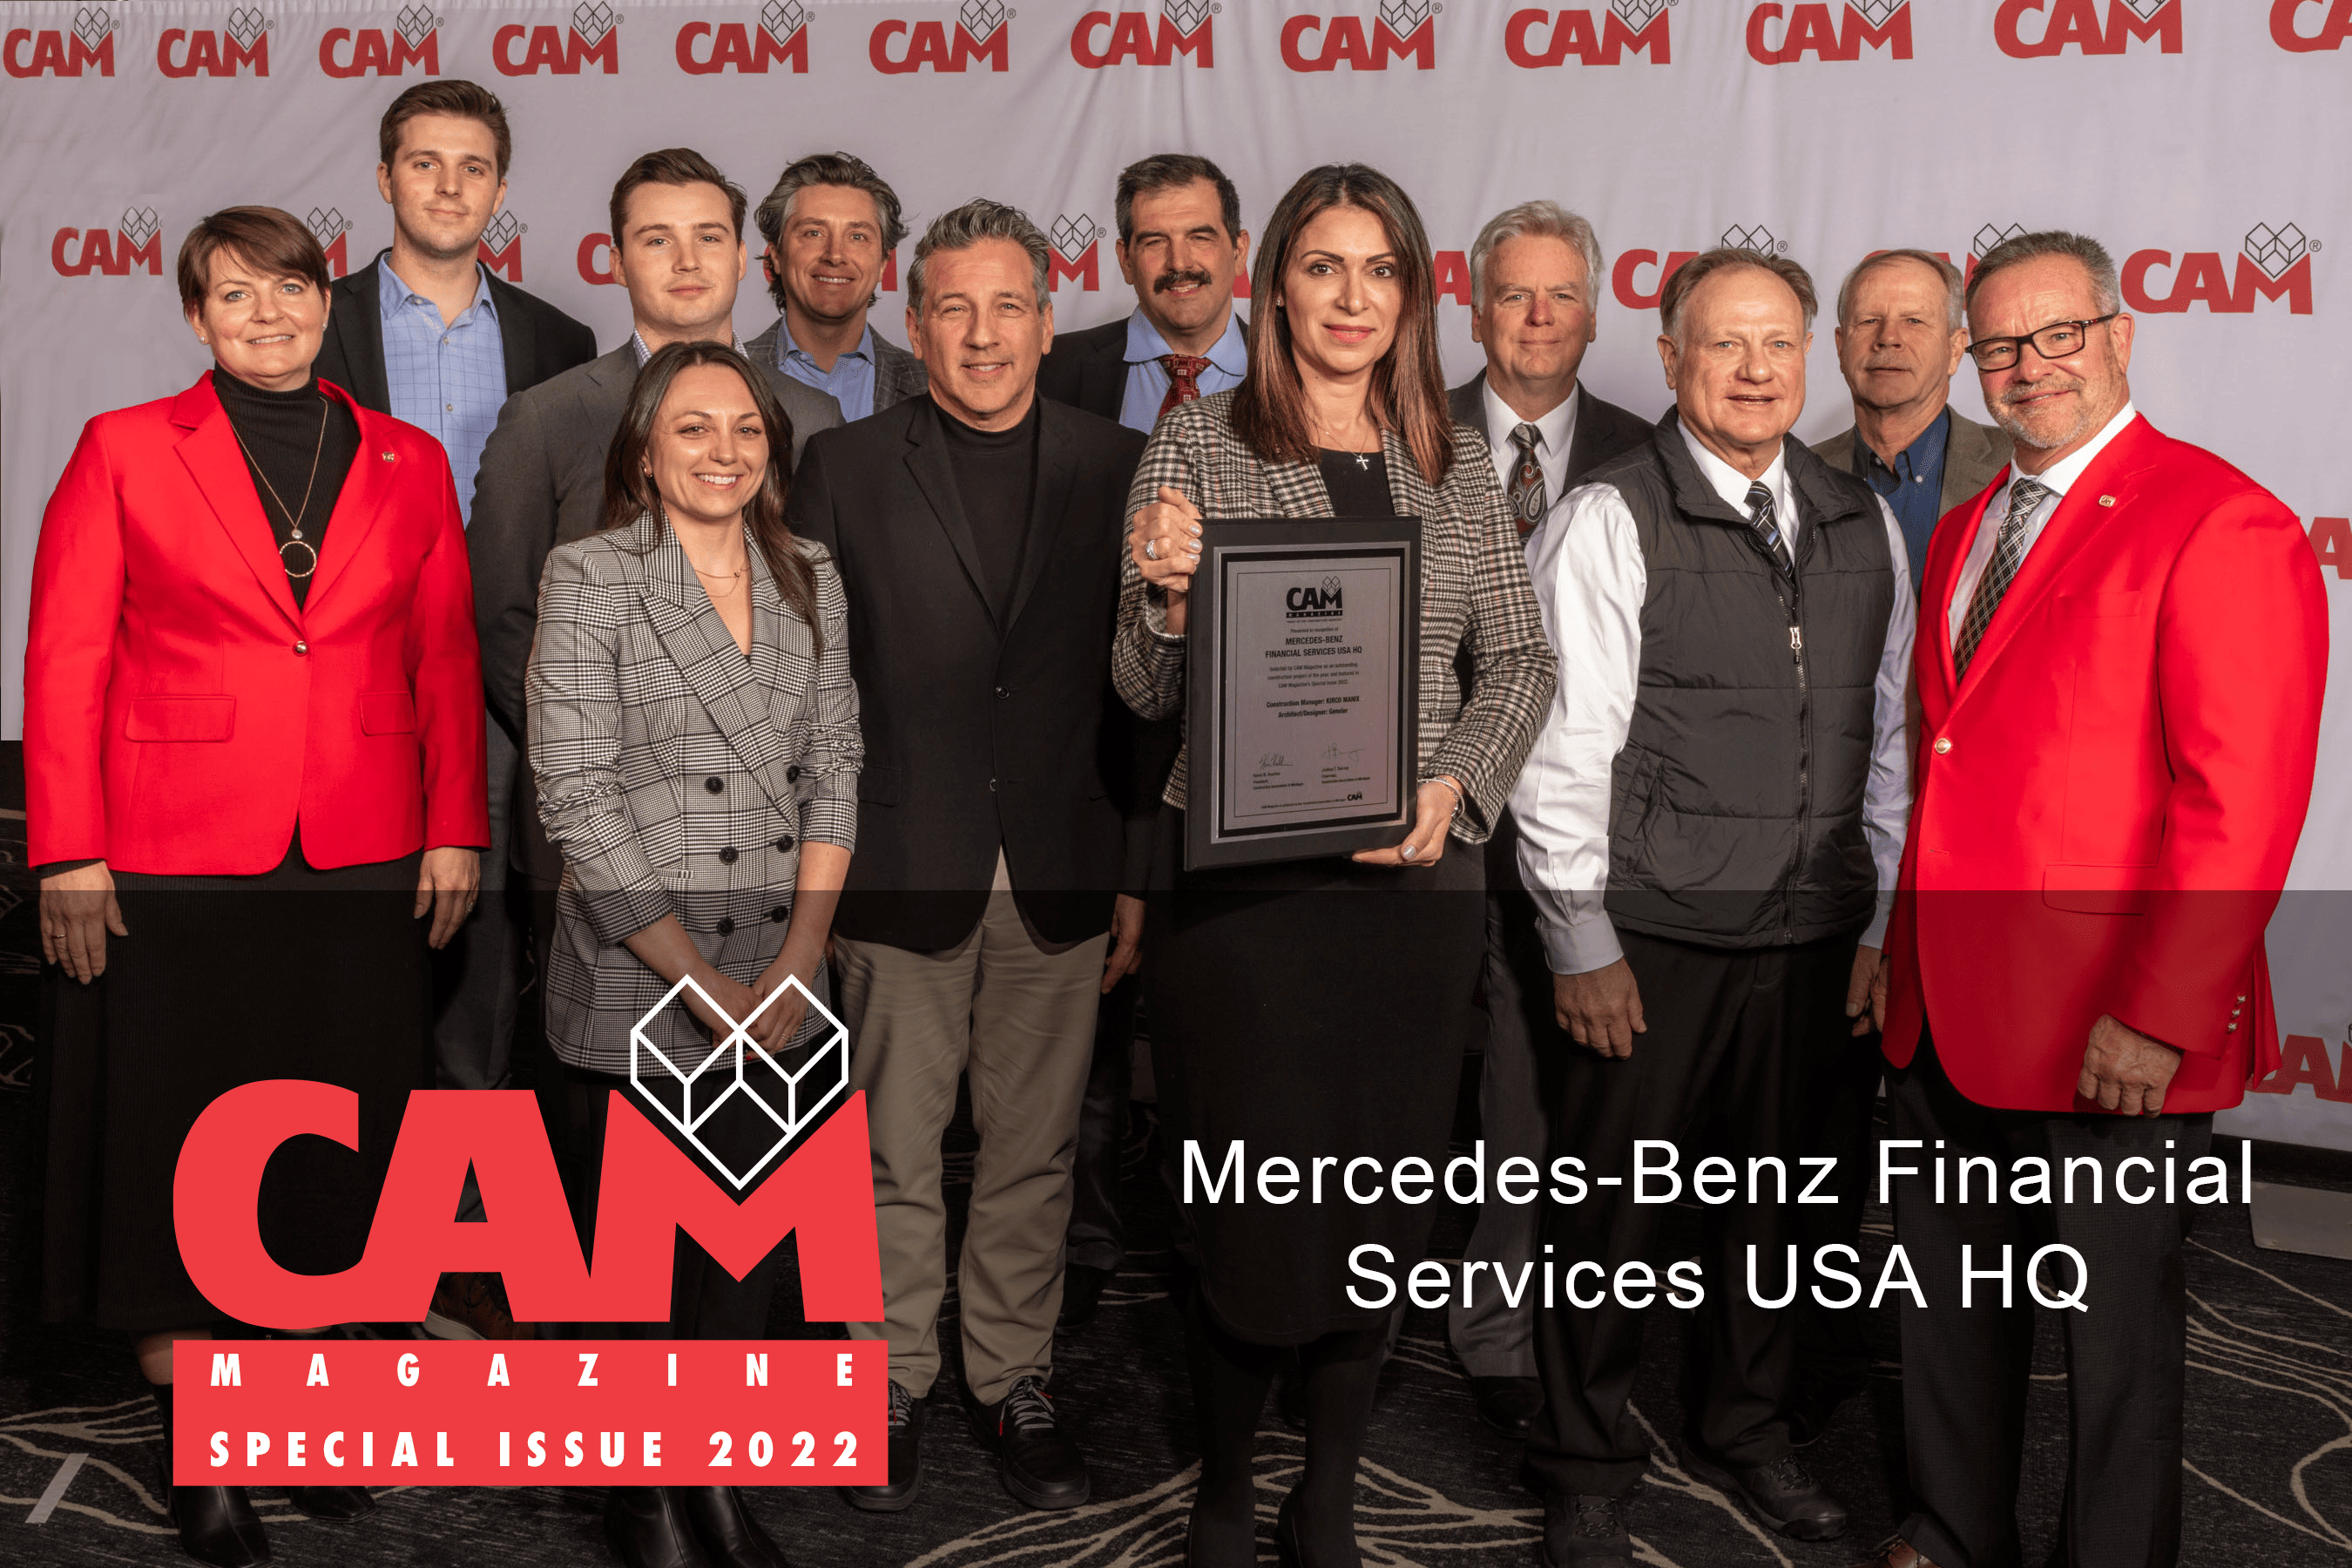 Mercedes-Benz Financial Services USA Headquarters Recognized as CAM Outstanding Project of 2022